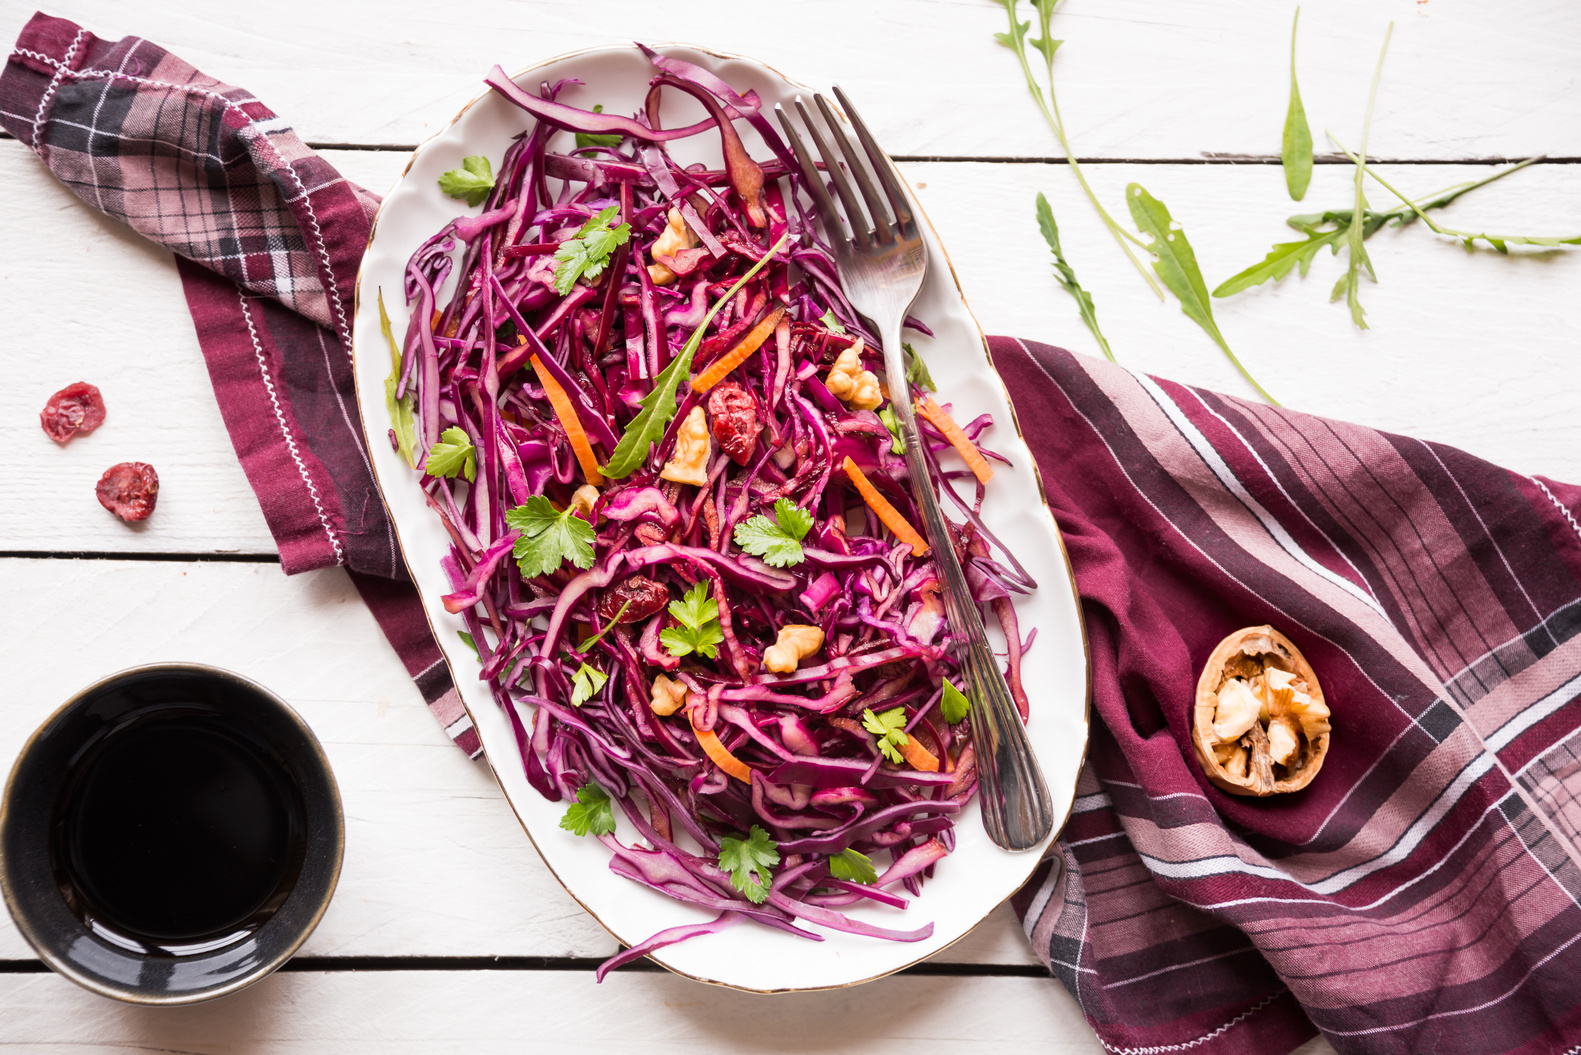 Delicious red cabbage salad. Cut red cabbage with other ingredients